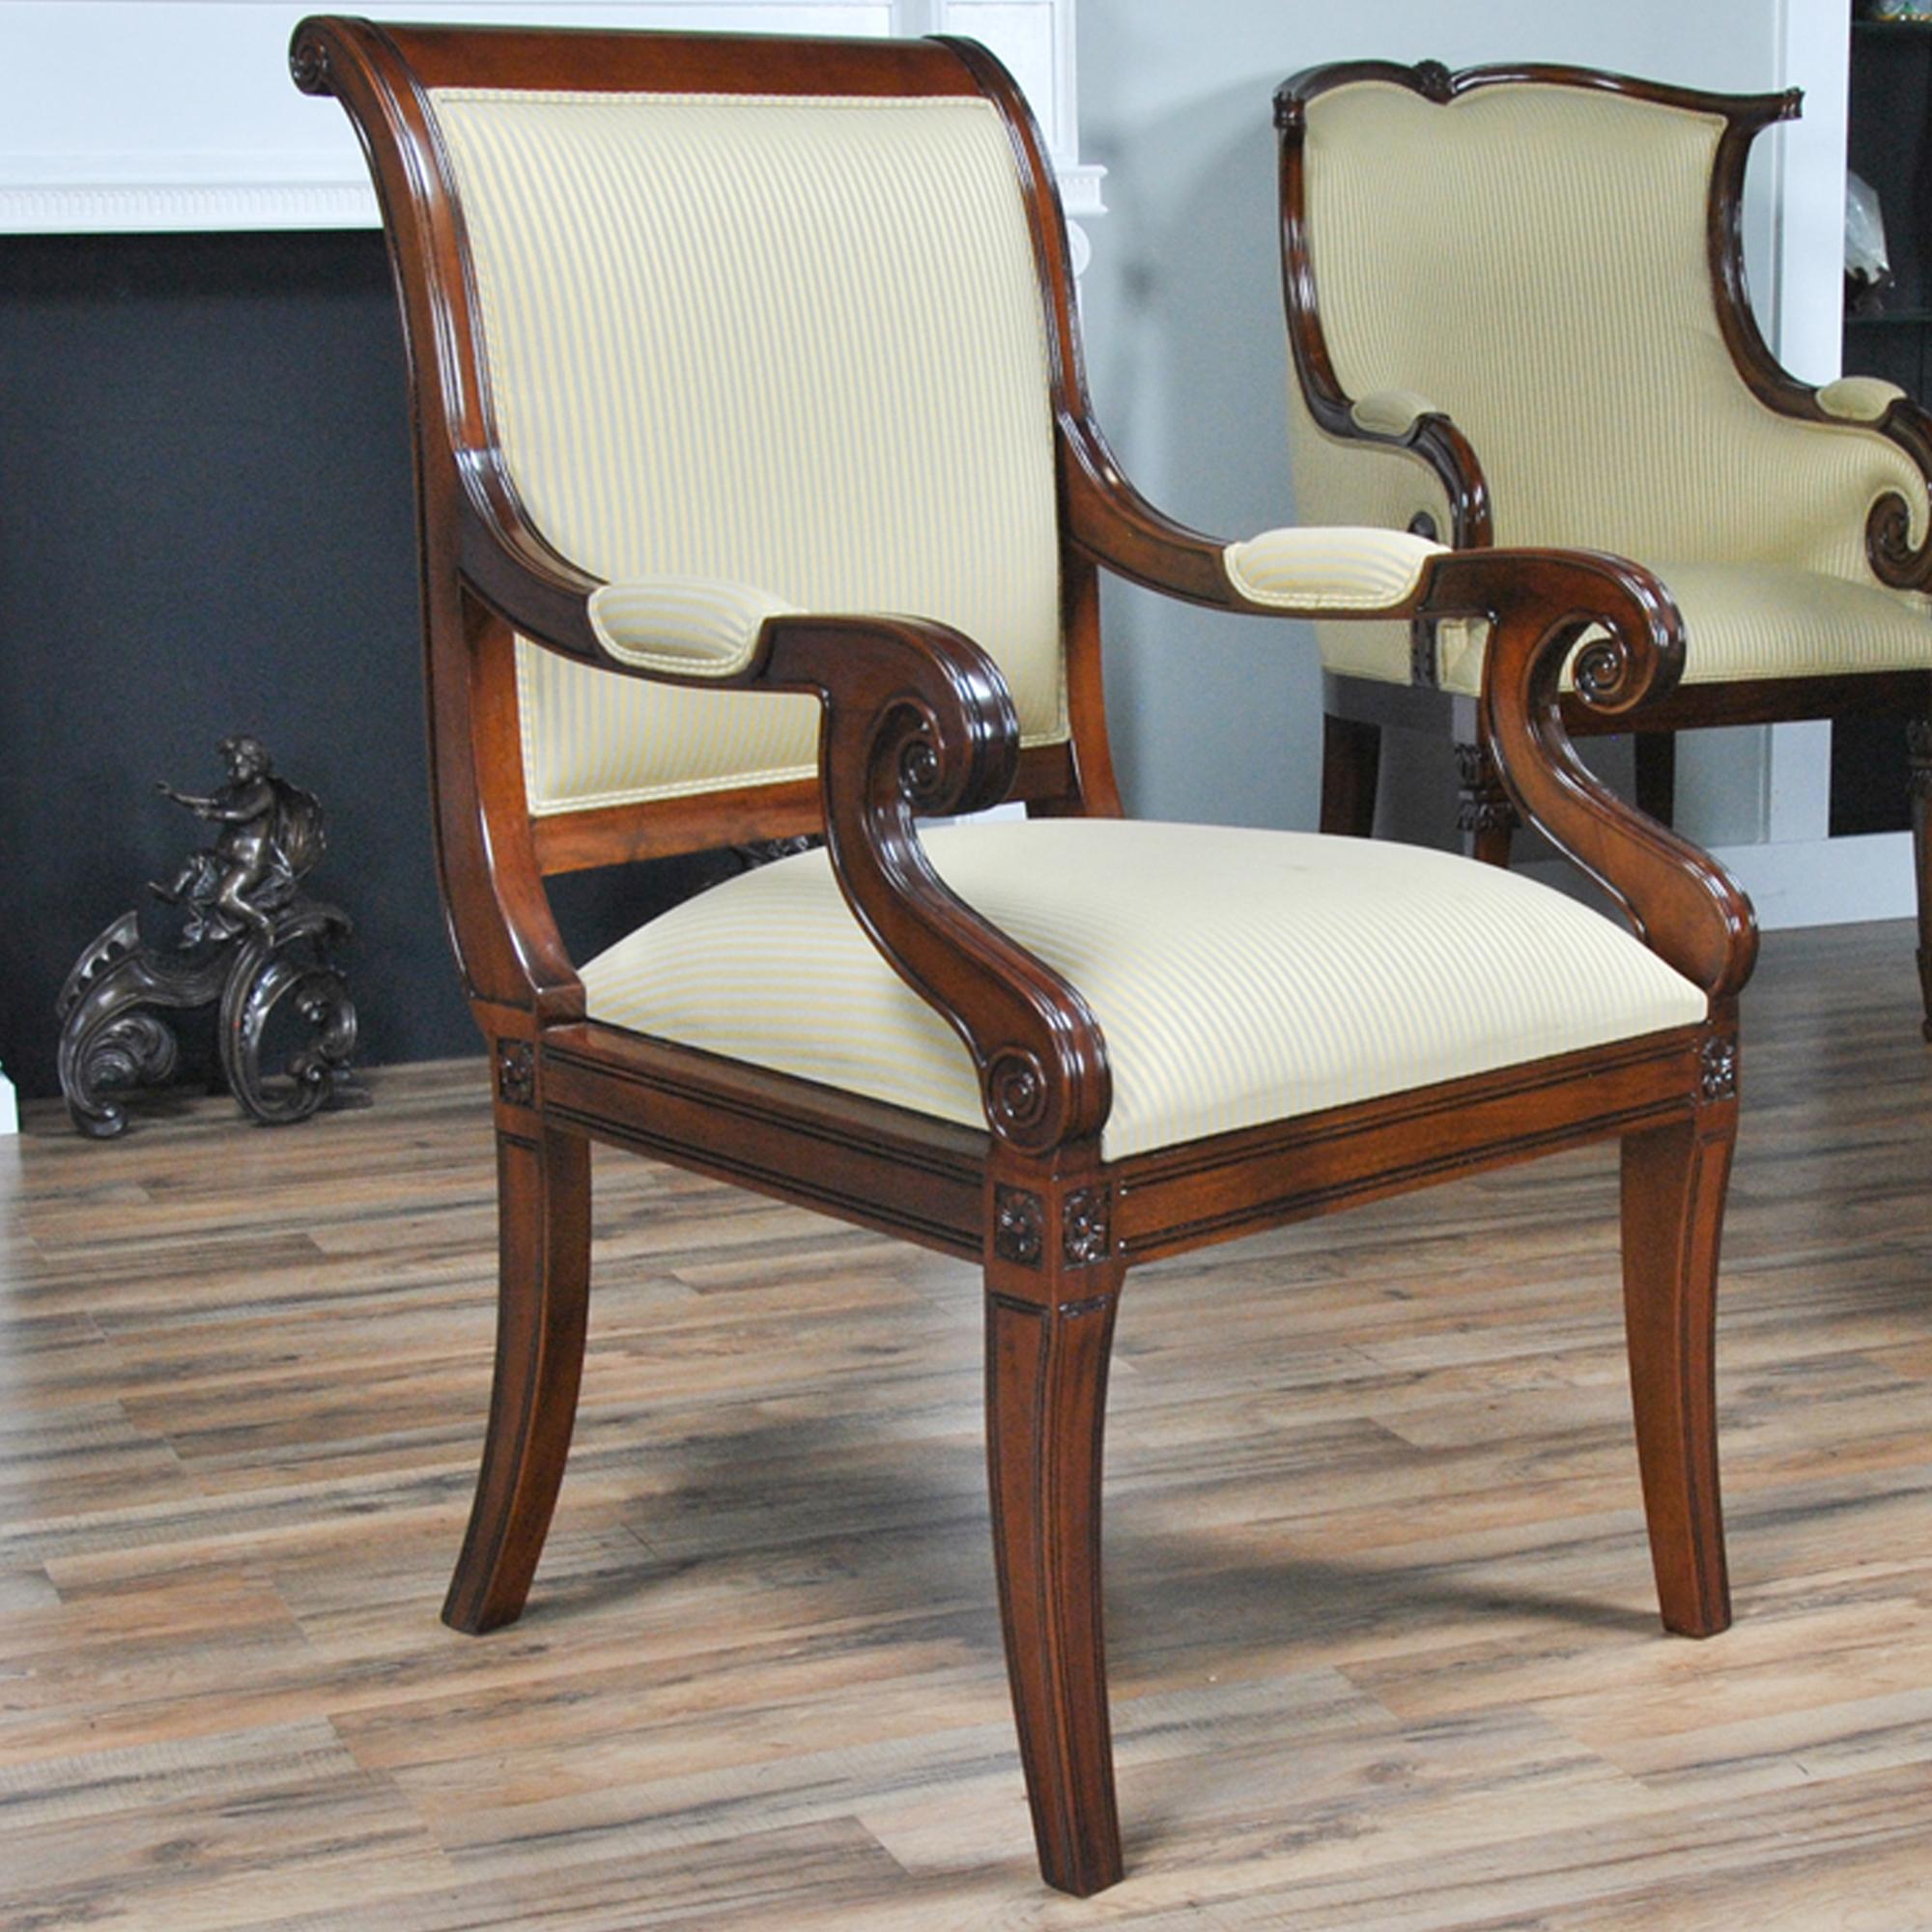 This set of 10 Regency Upholstered Chairs are complete with 2 arm chairs and 8 side chairs. The super simple design of the Regency Upholstered Chairs feature sweeping lines and finely executed details which makes these great quality chairs very